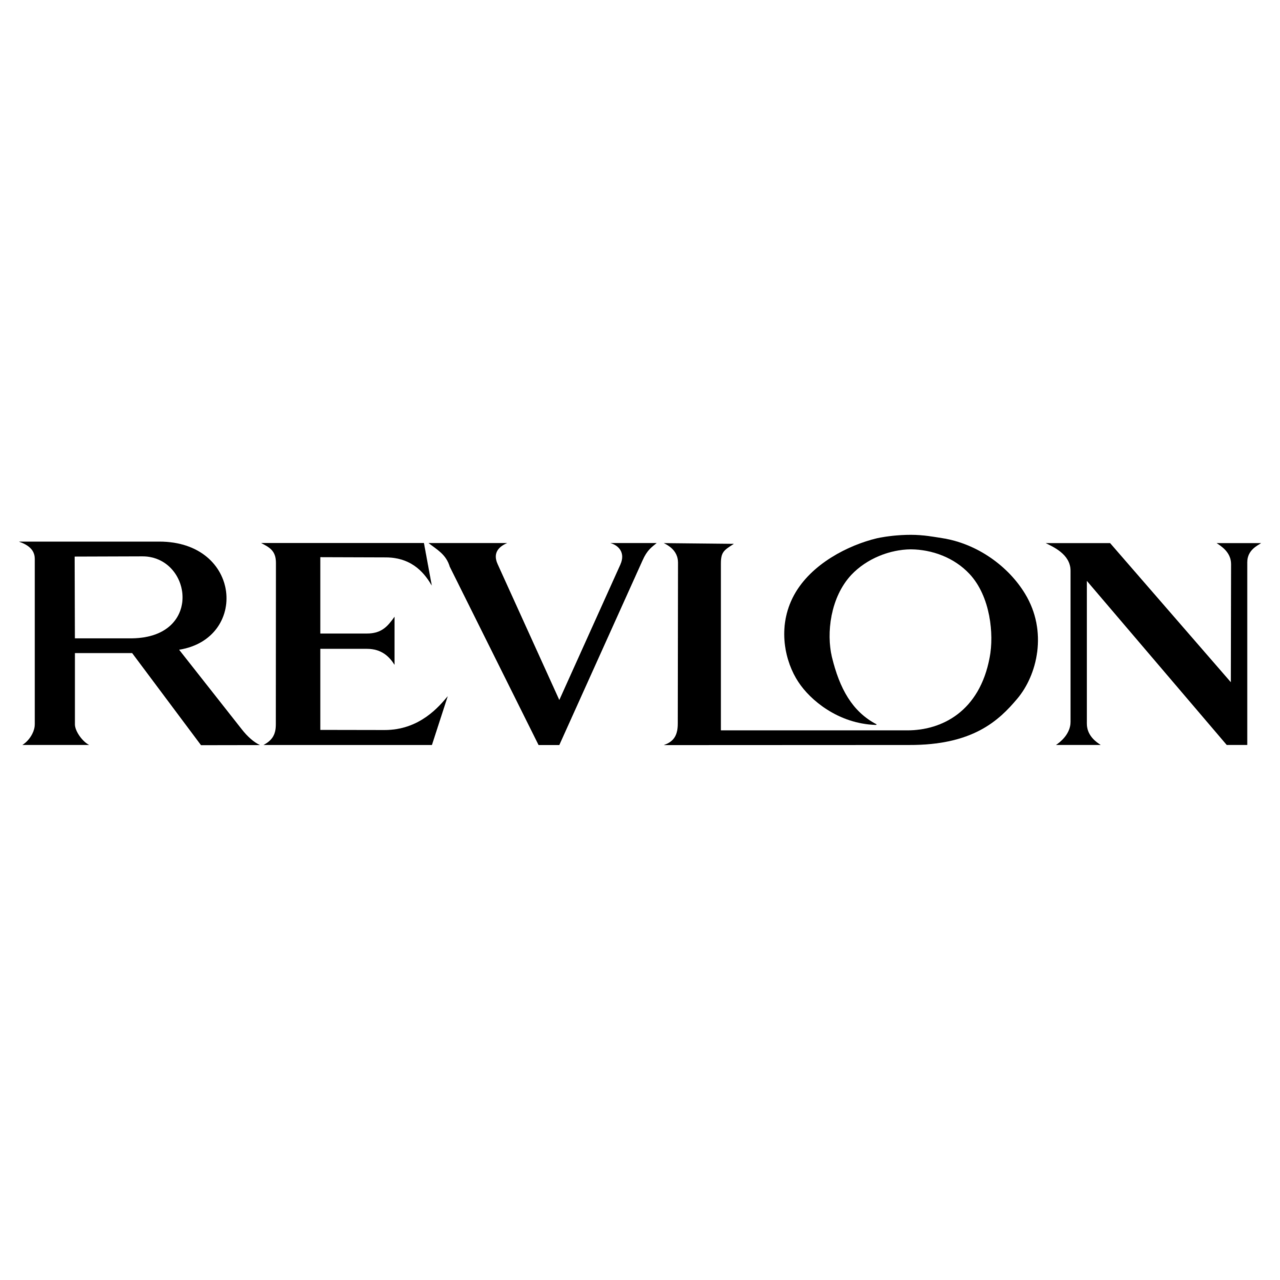 pick and place motion symbol